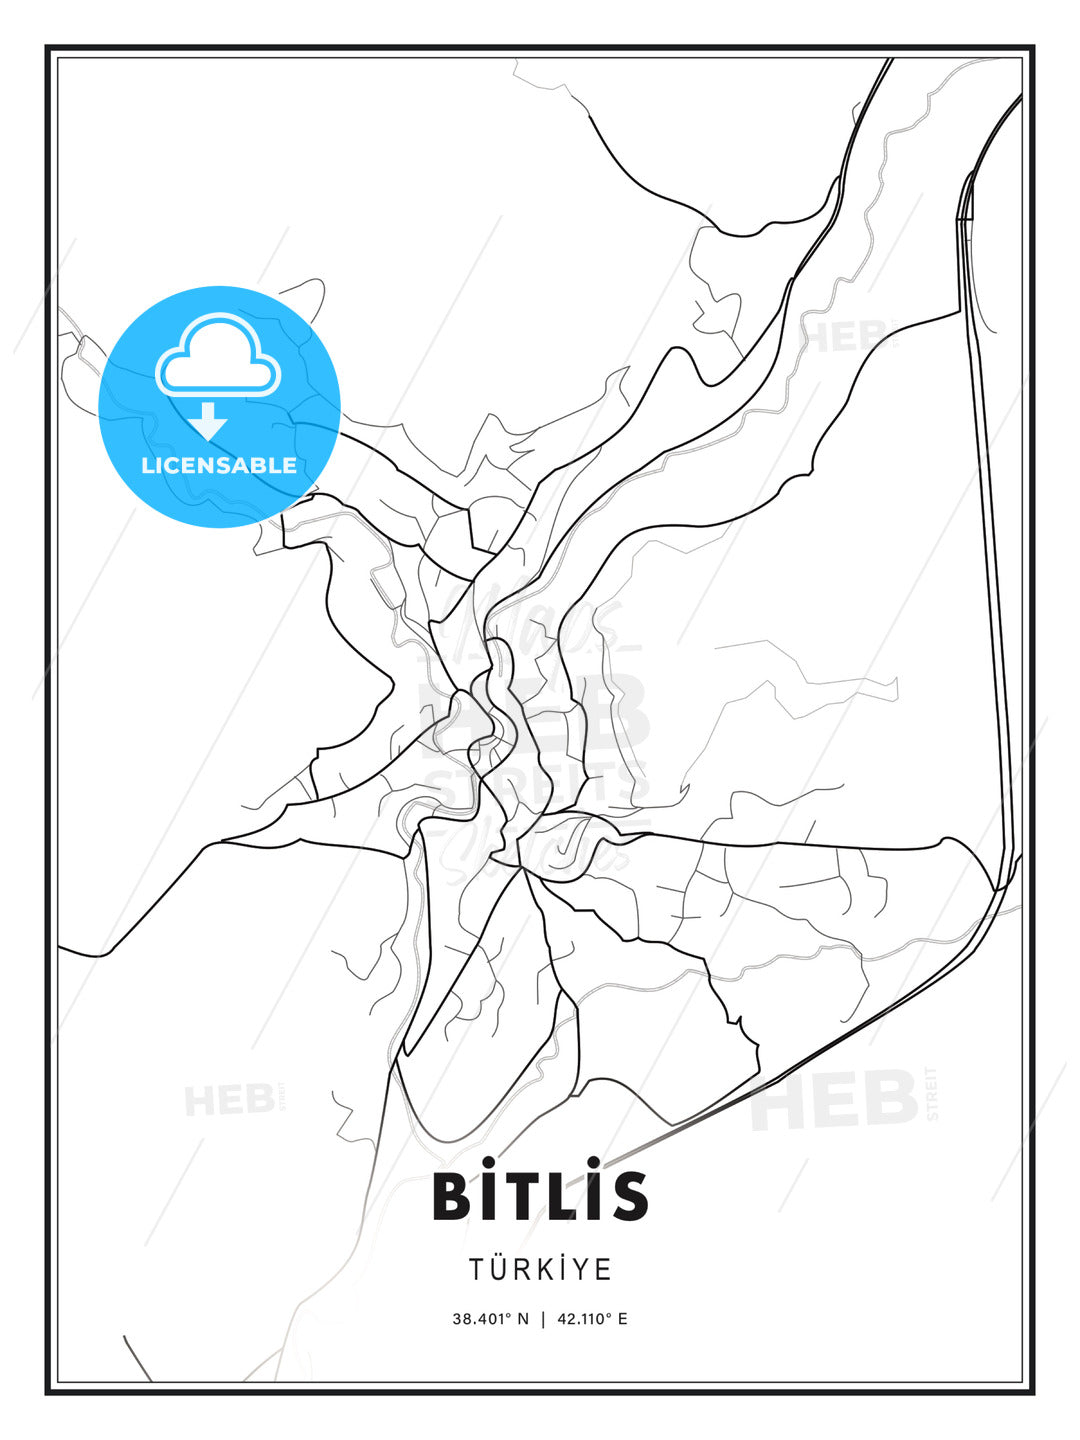 BİTLİS / Bitlis, Turkey, Modern Print Template in Various Formats - HEBSTREITS Sketches